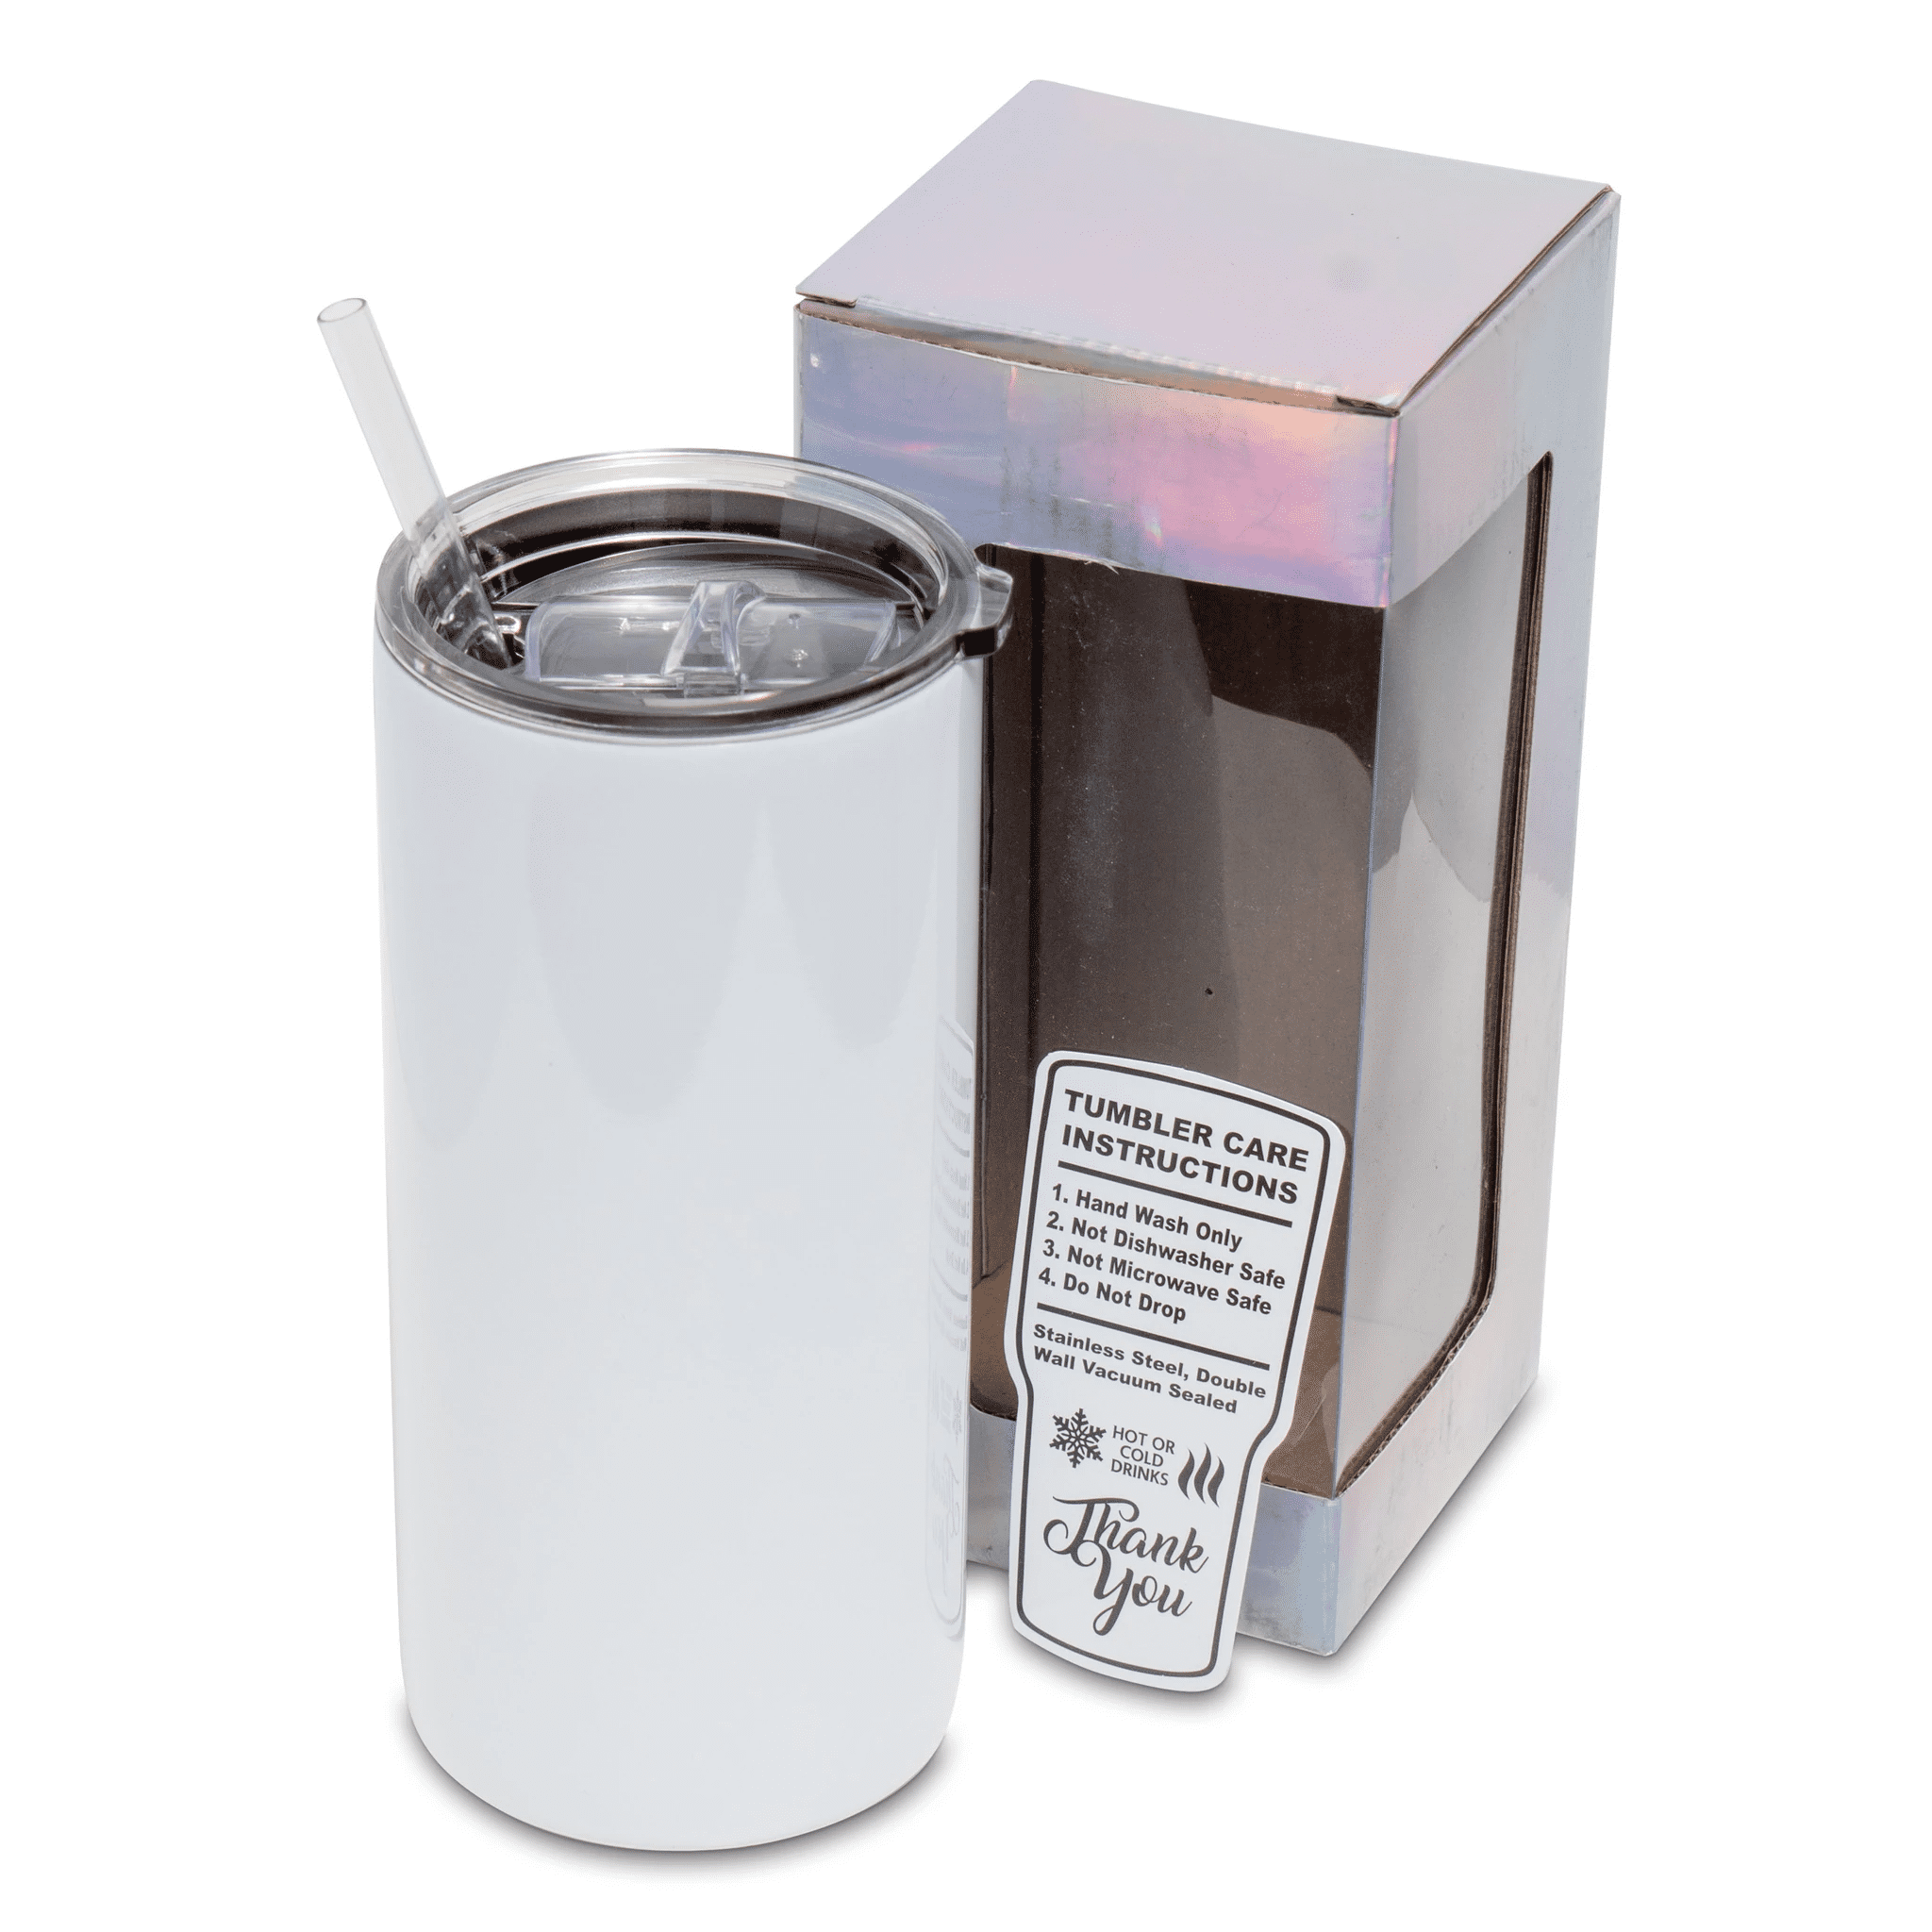 MakerFlo 12oz Slim Duozie Sublimation Blank Tumbler, Stainless Steel Insulated Tumbler, DIY Gifts, 1 PC